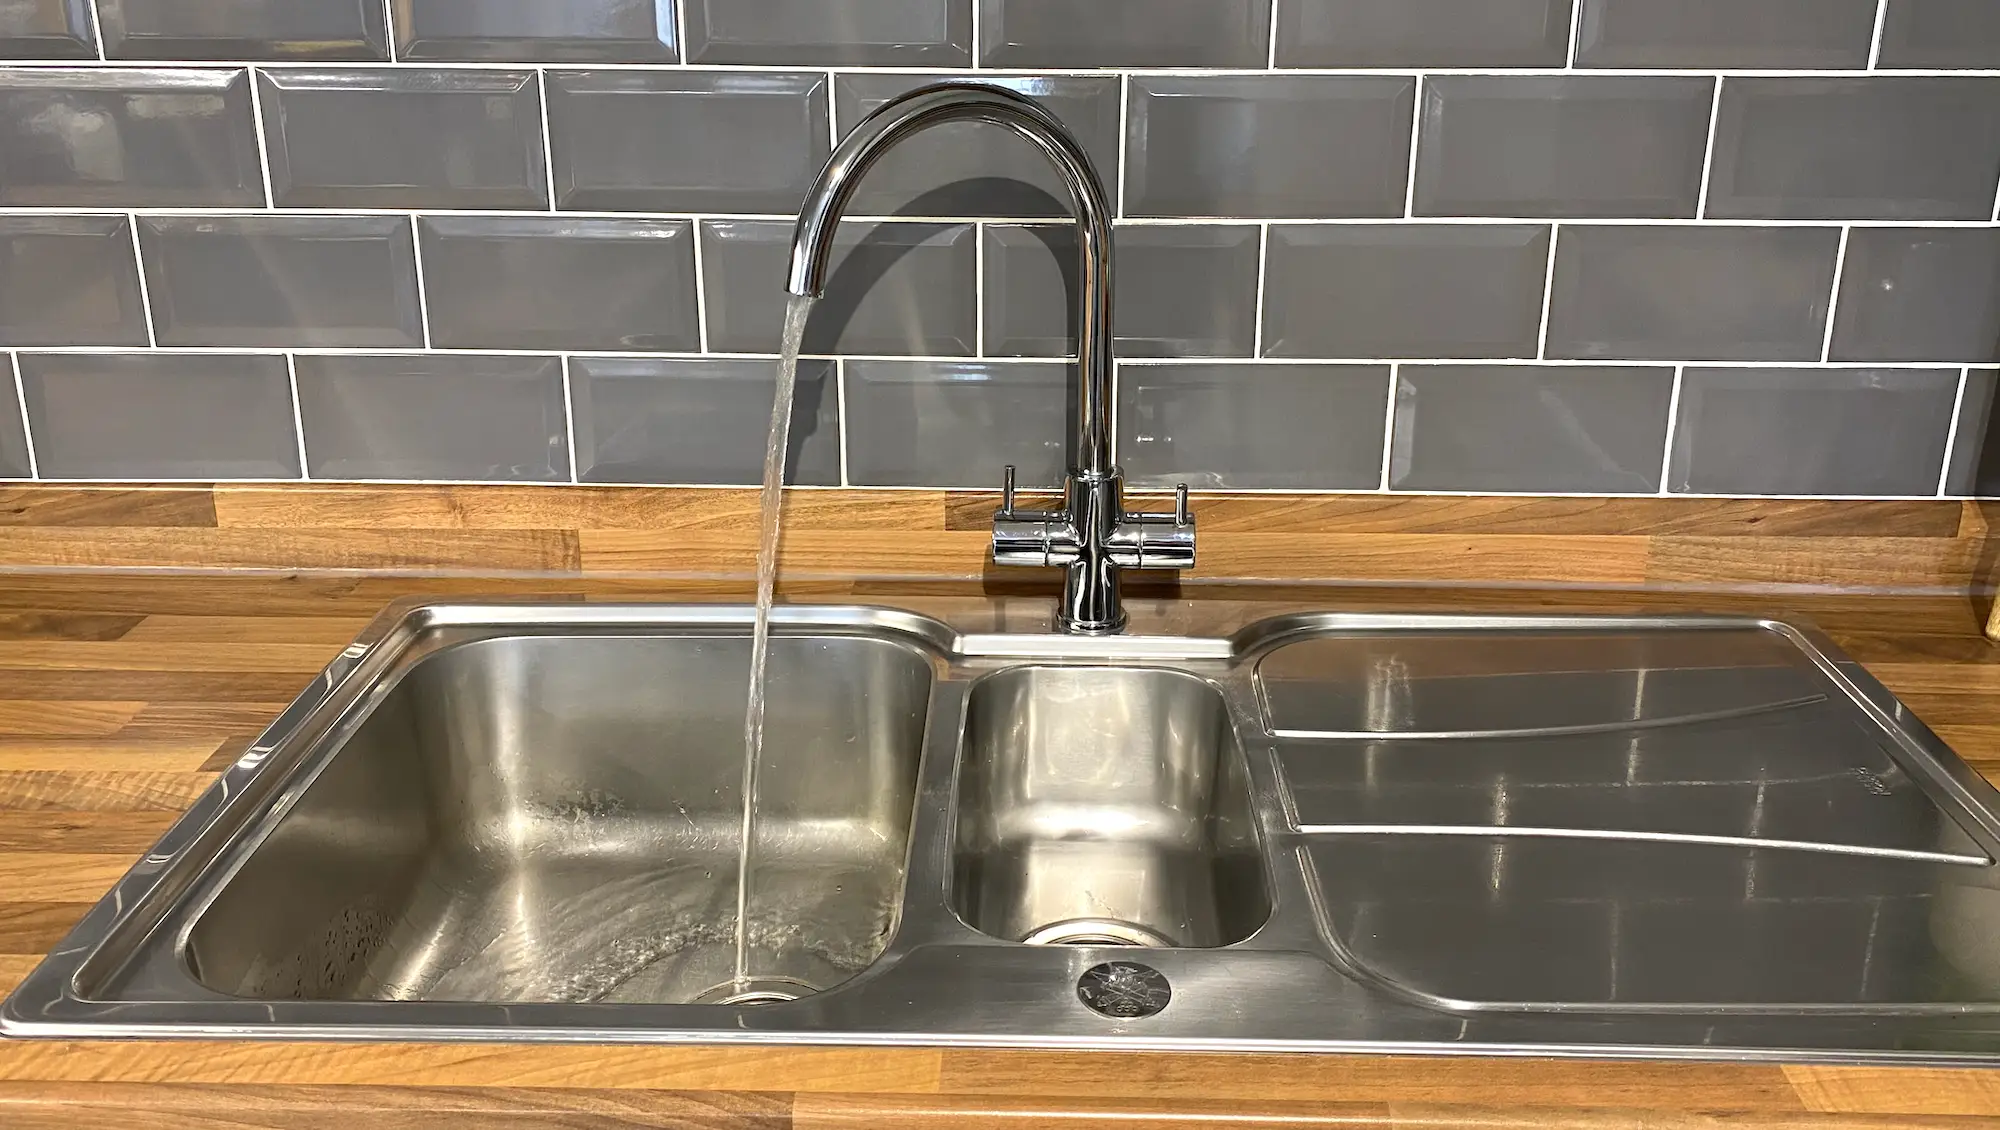 Estimates for replace a kitchen mixer tap near East London